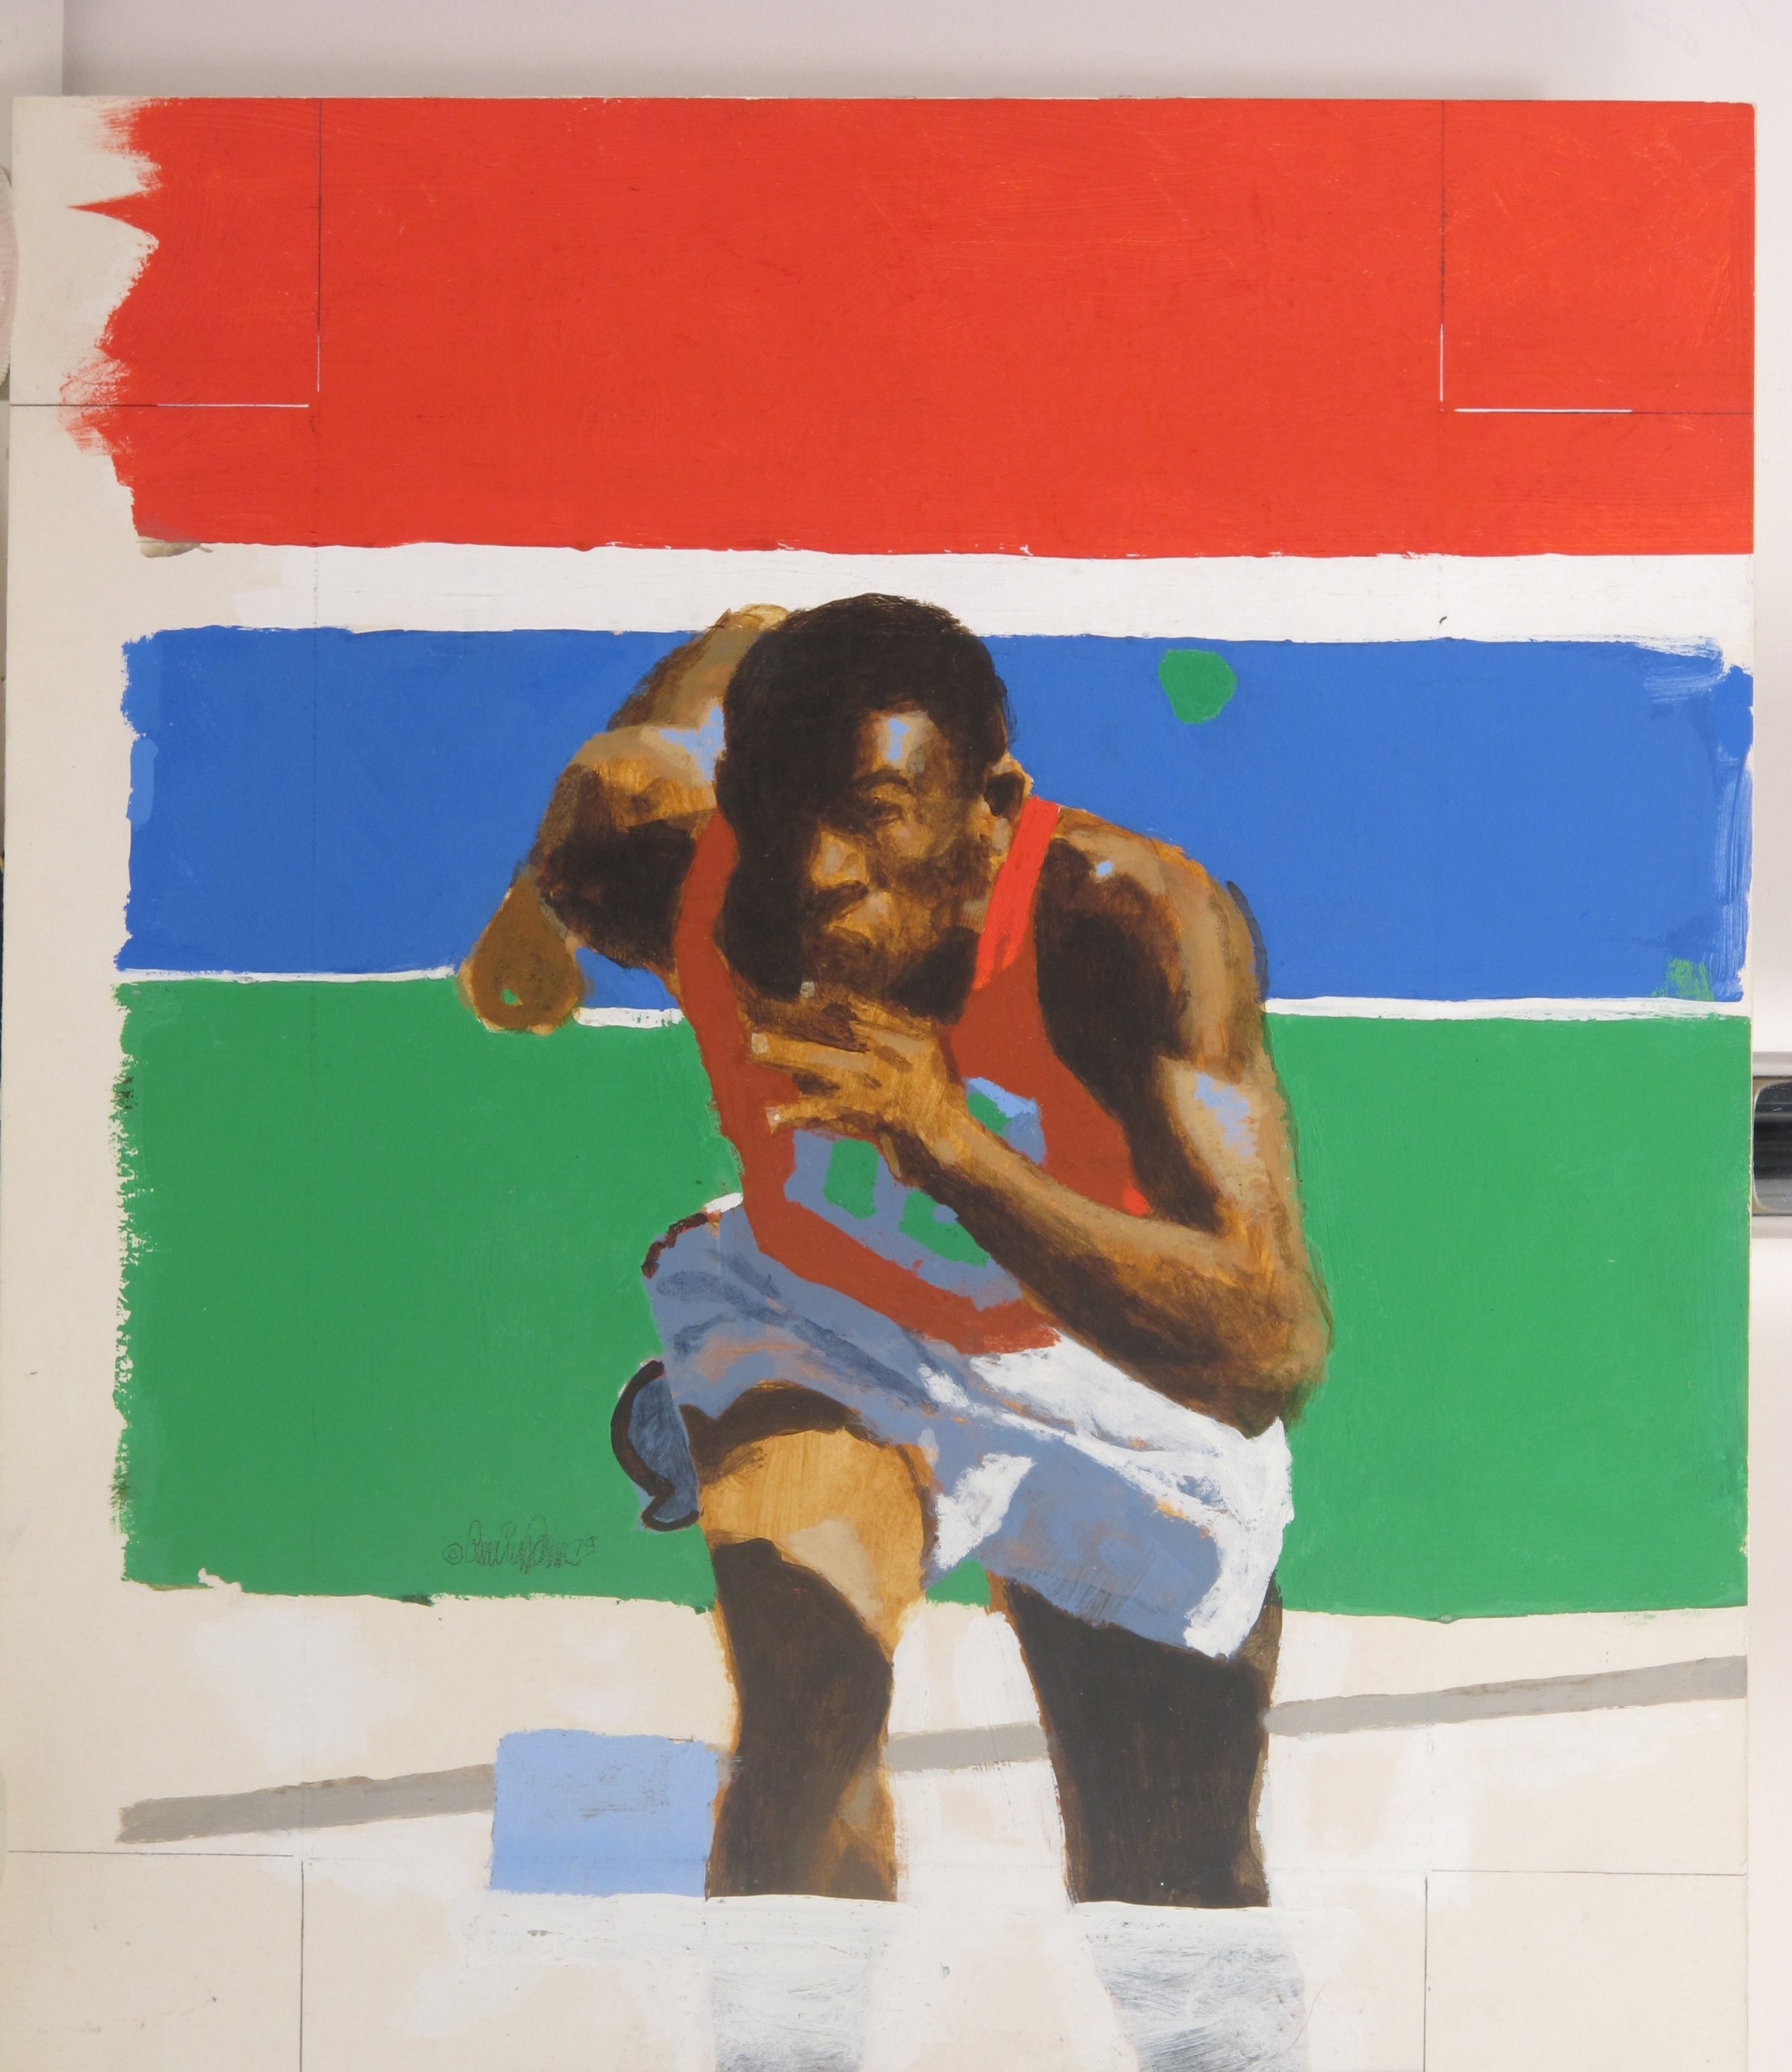 Robert Cunningham (1924-2010), ‘Olympic Sprinter,’ 1980. Acrylic on paper. Norman Rockwell Museum Collection. © 1980 Copyright Robert Cunningham estate